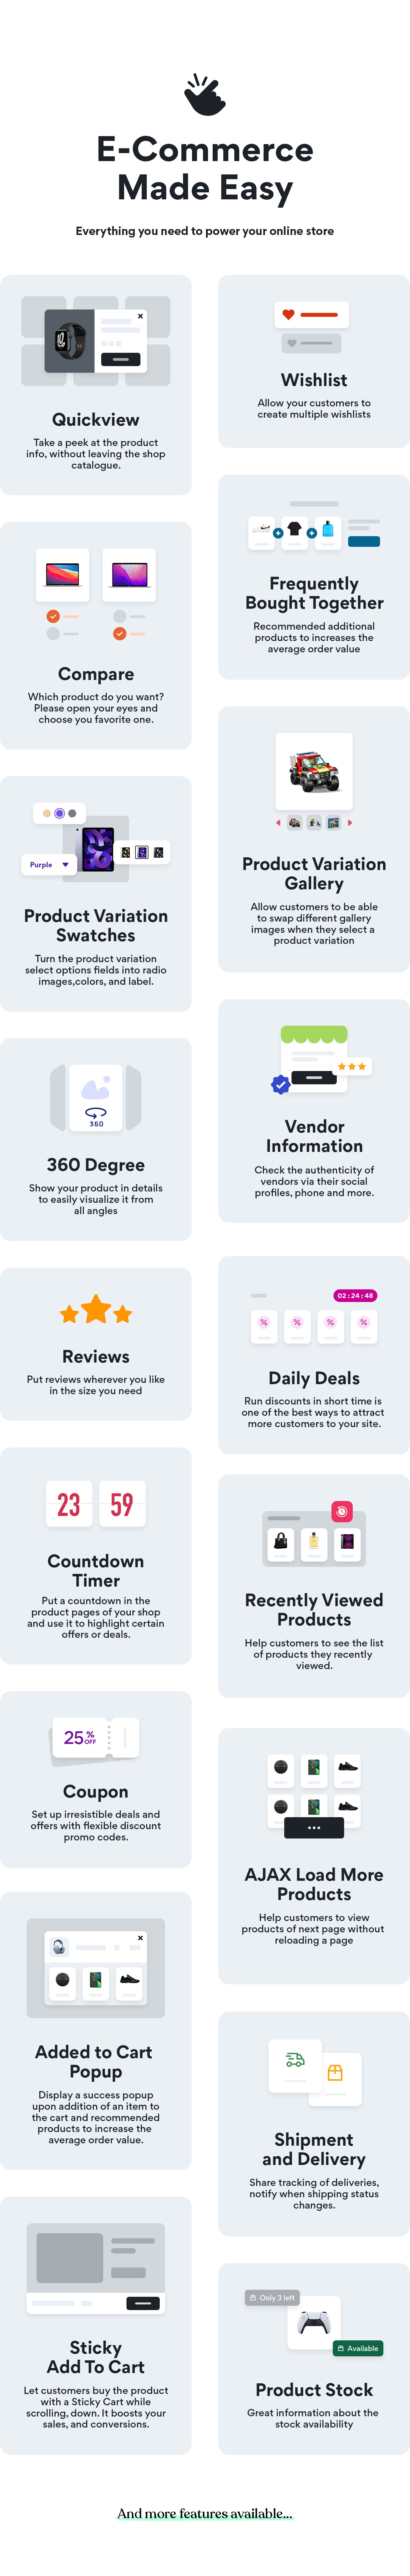 Motta WooCommerce theme - Everything you need to power your online store, with many built-in features